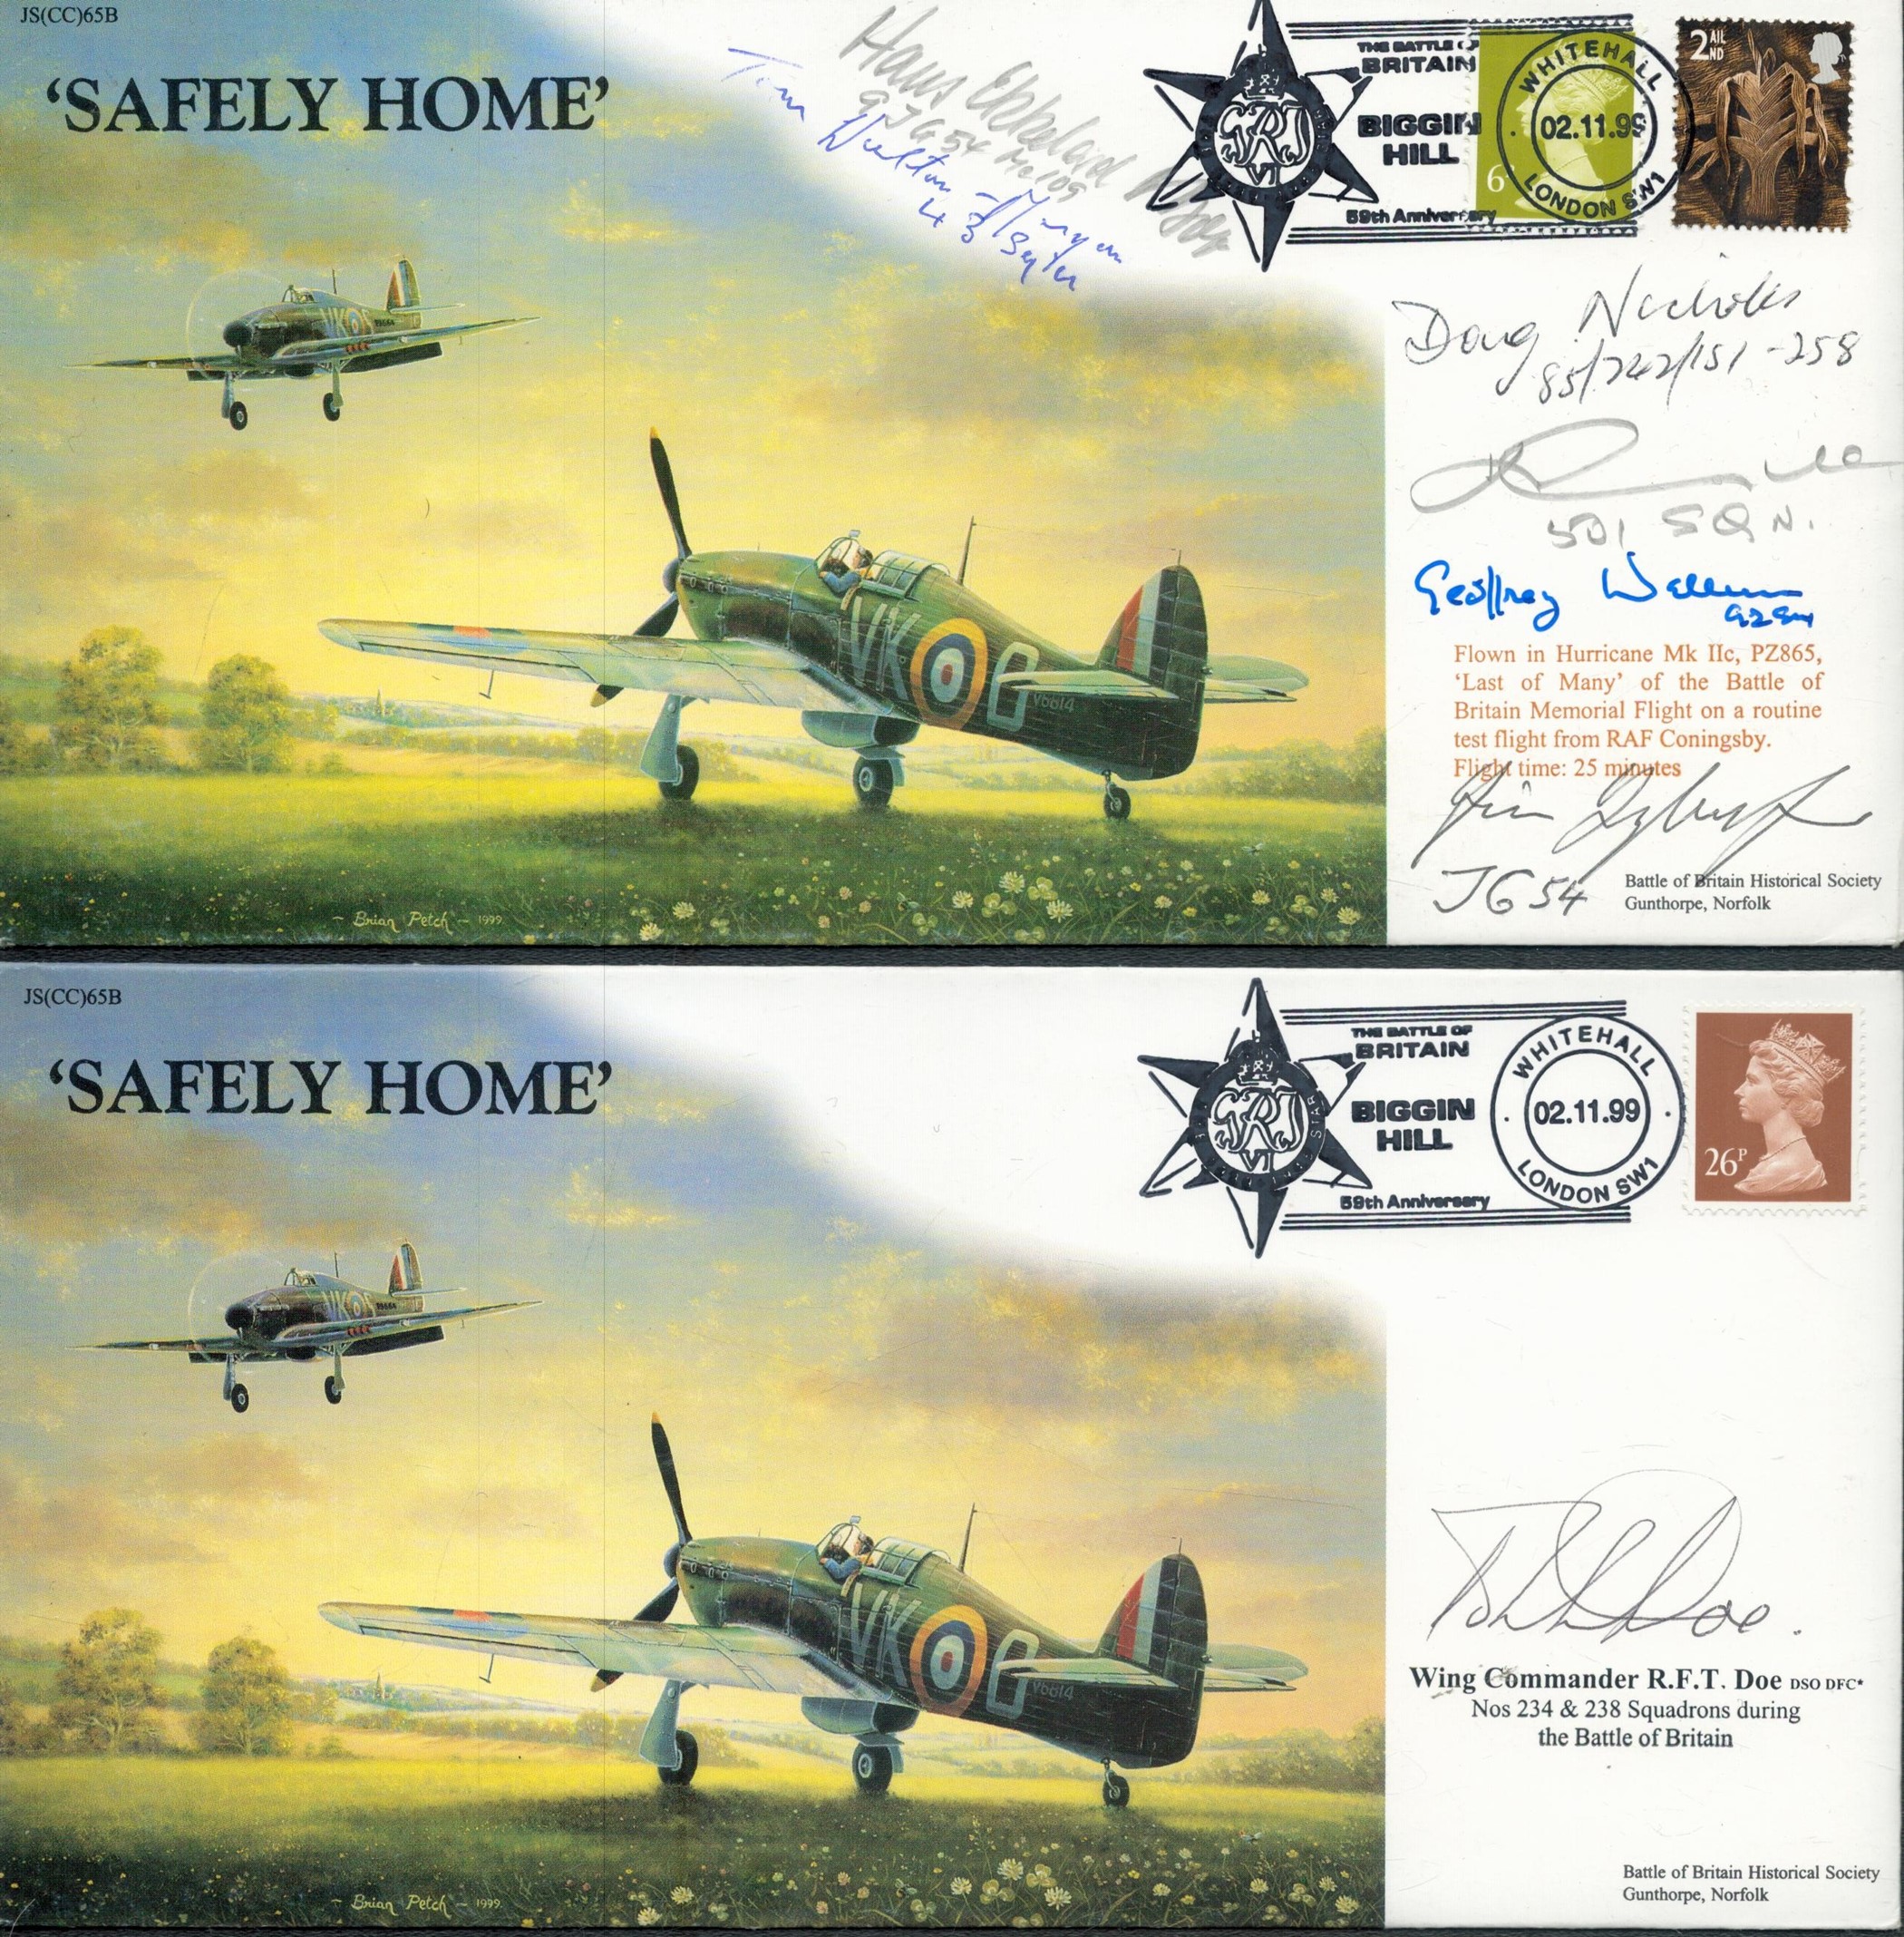 Safely Home Collection of 4 Signed FDCs signatures include Robert F T Doe, Hans-Ekkehard Bob, - Image 3 of 6